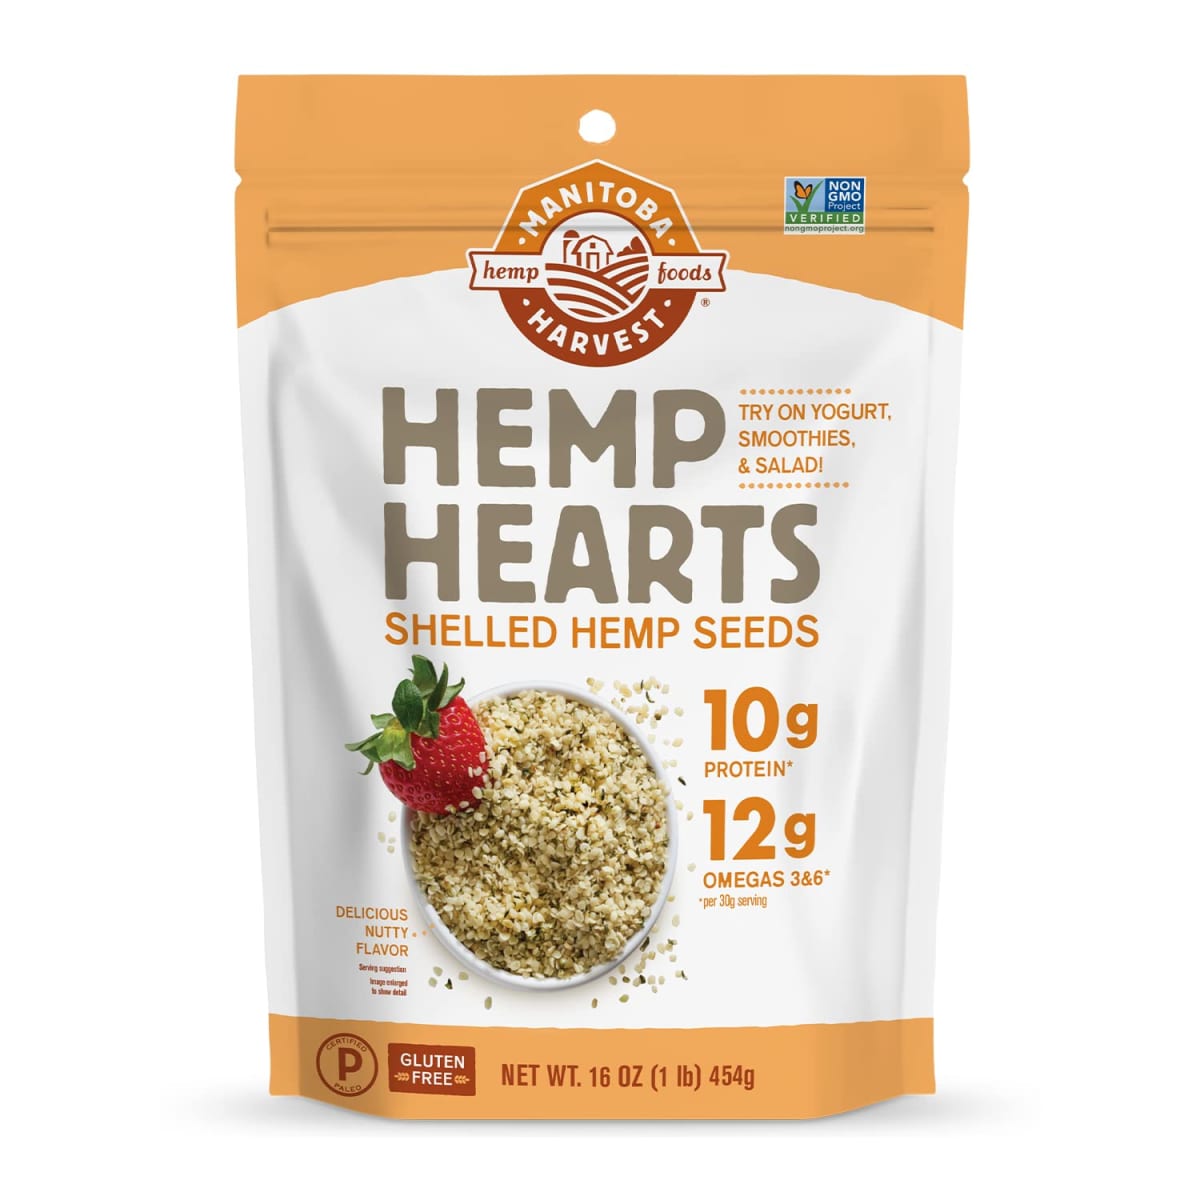 Plant Based Protein and 12g Omega 3 & 6 per Serving | Perfect for smoothies, yogurt & salad